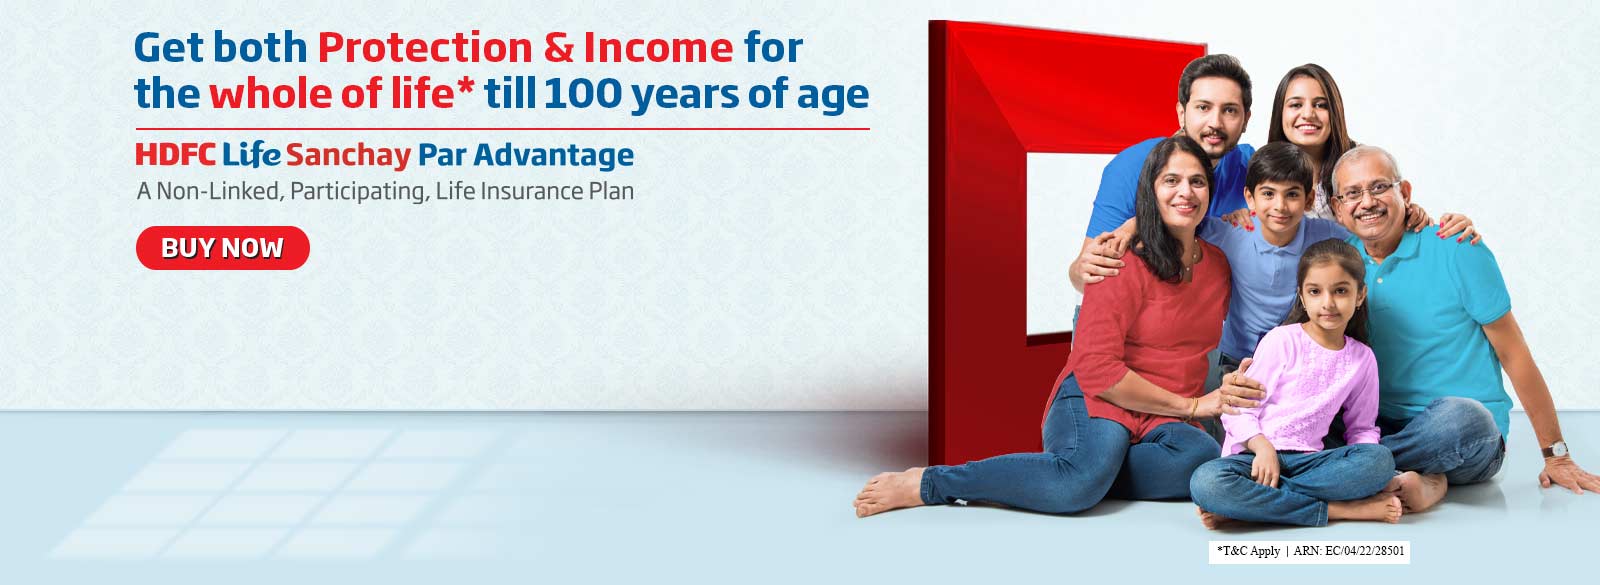 Hdfc Life Insurance Online Life Insurance Plans And Policies In India 9761